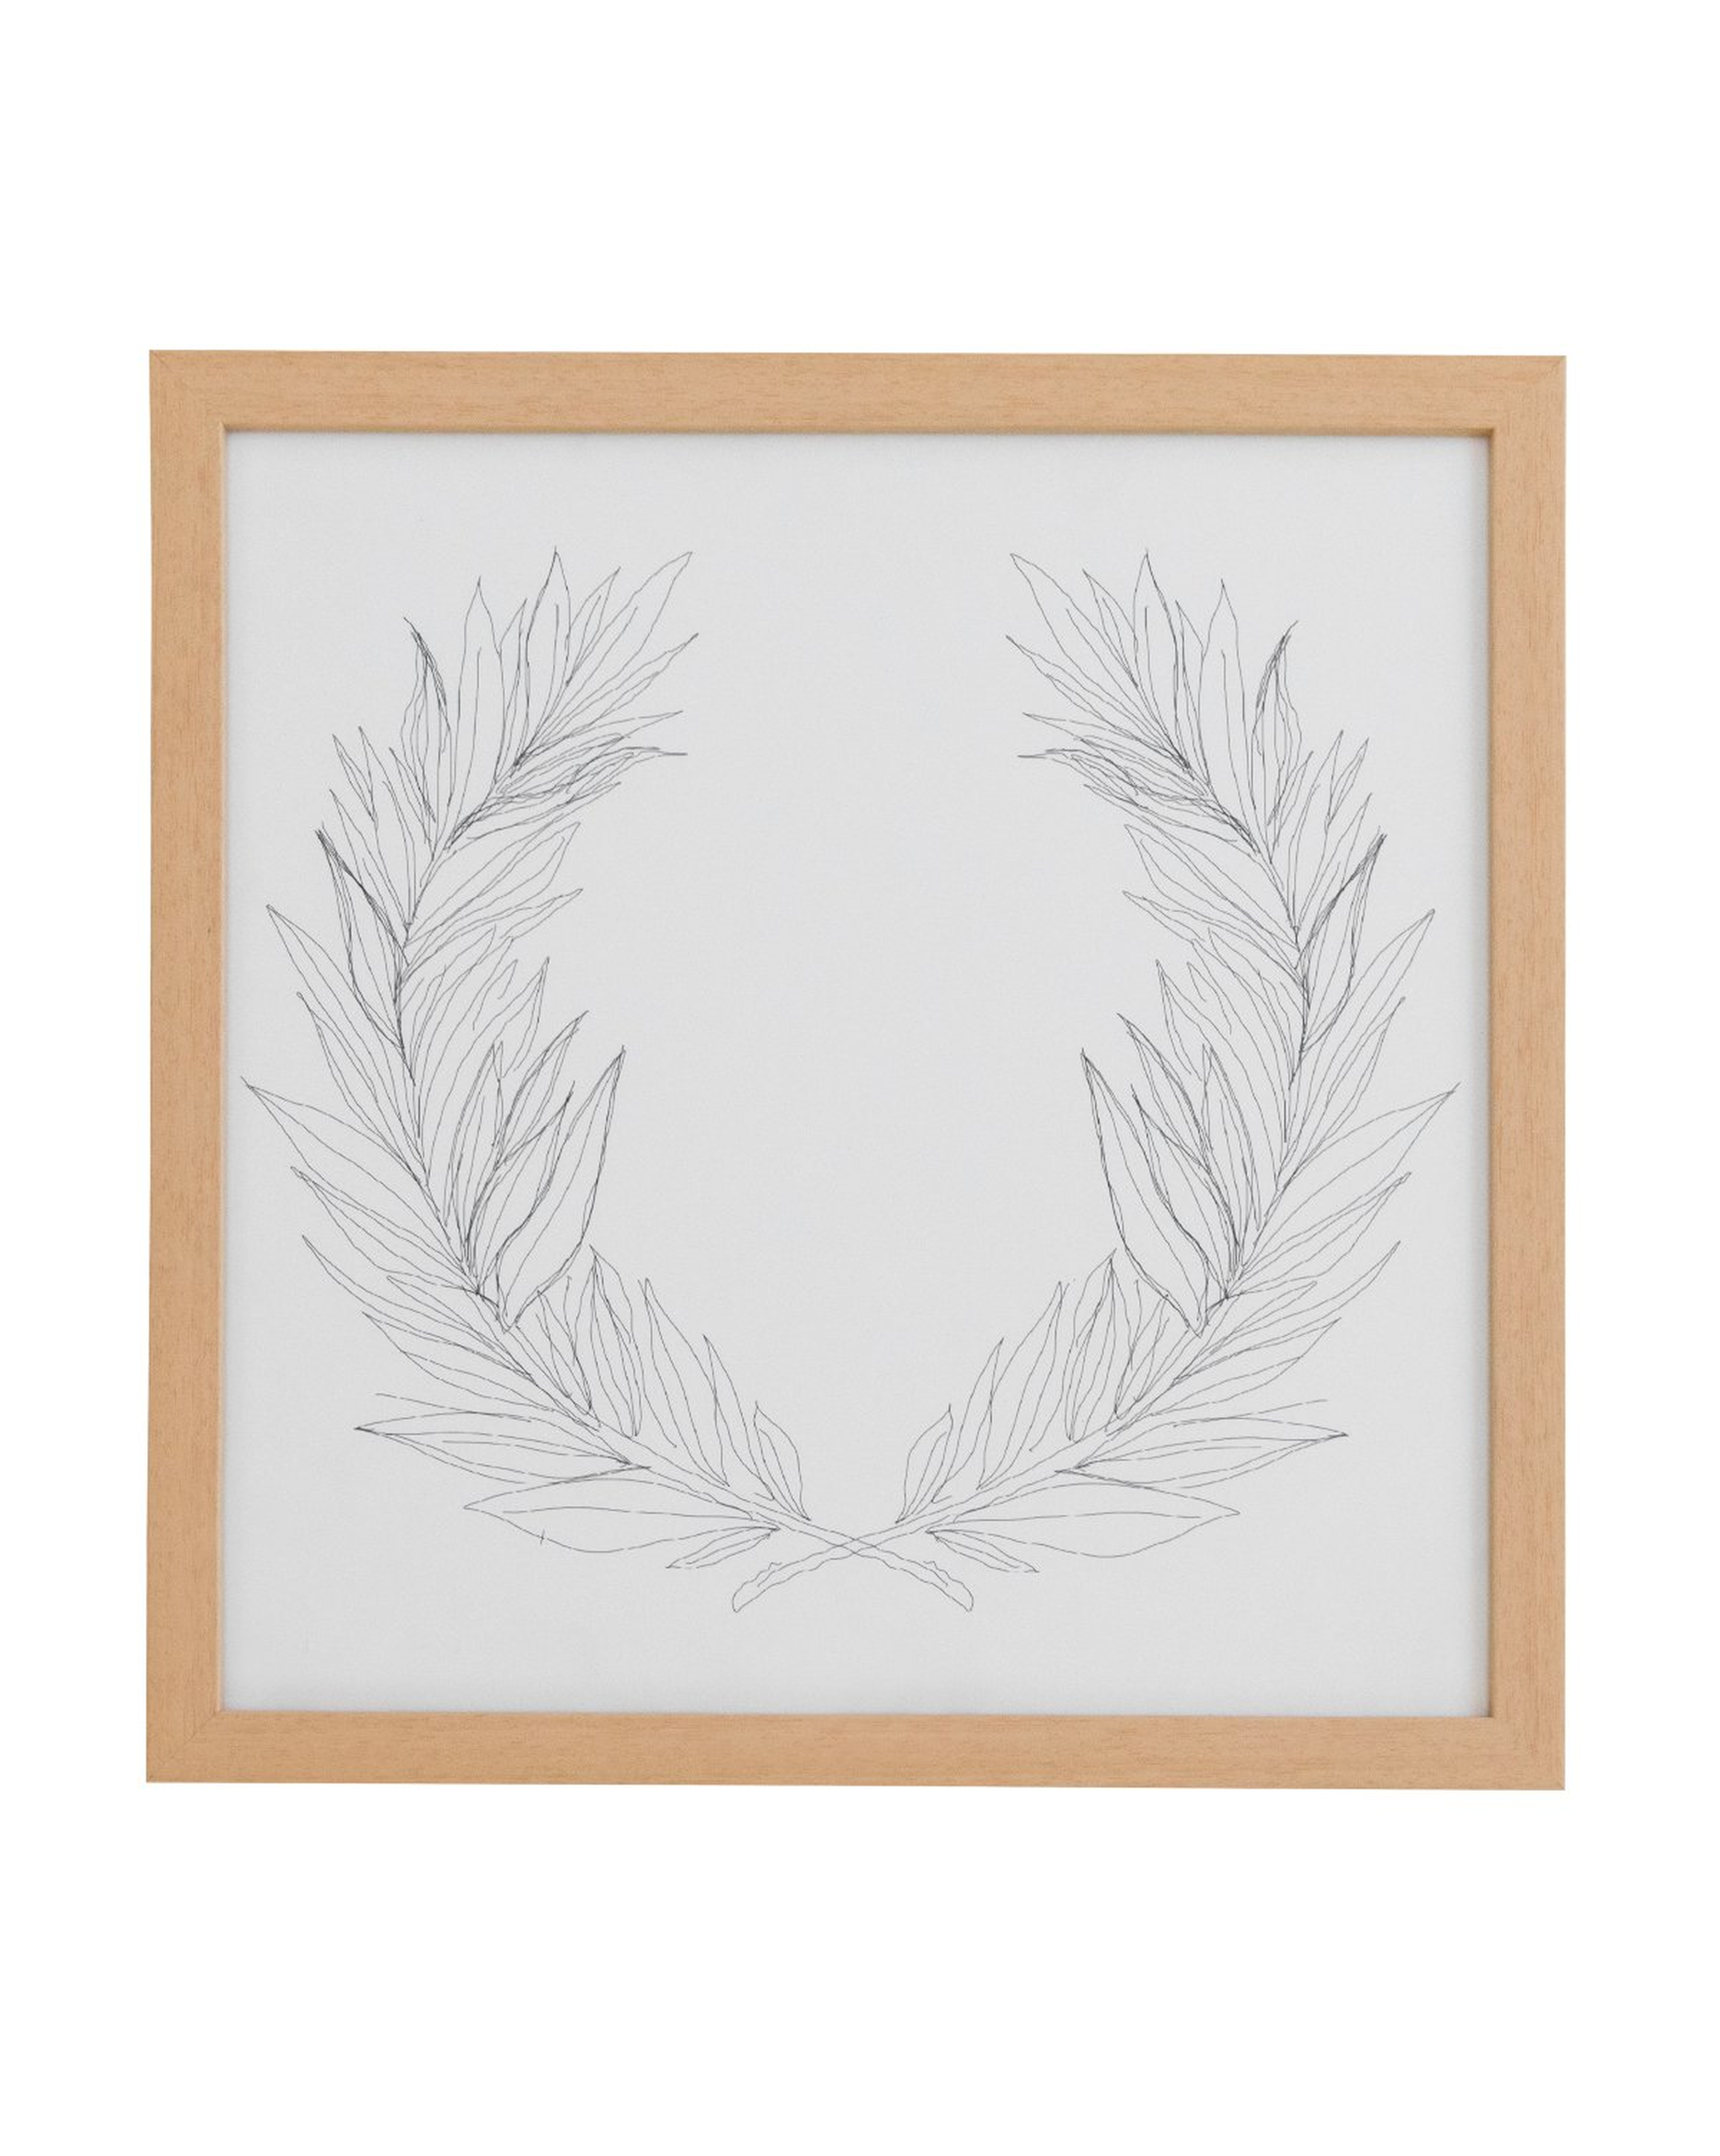 SIMPLE WREATH SKETCH - McGee & Co.